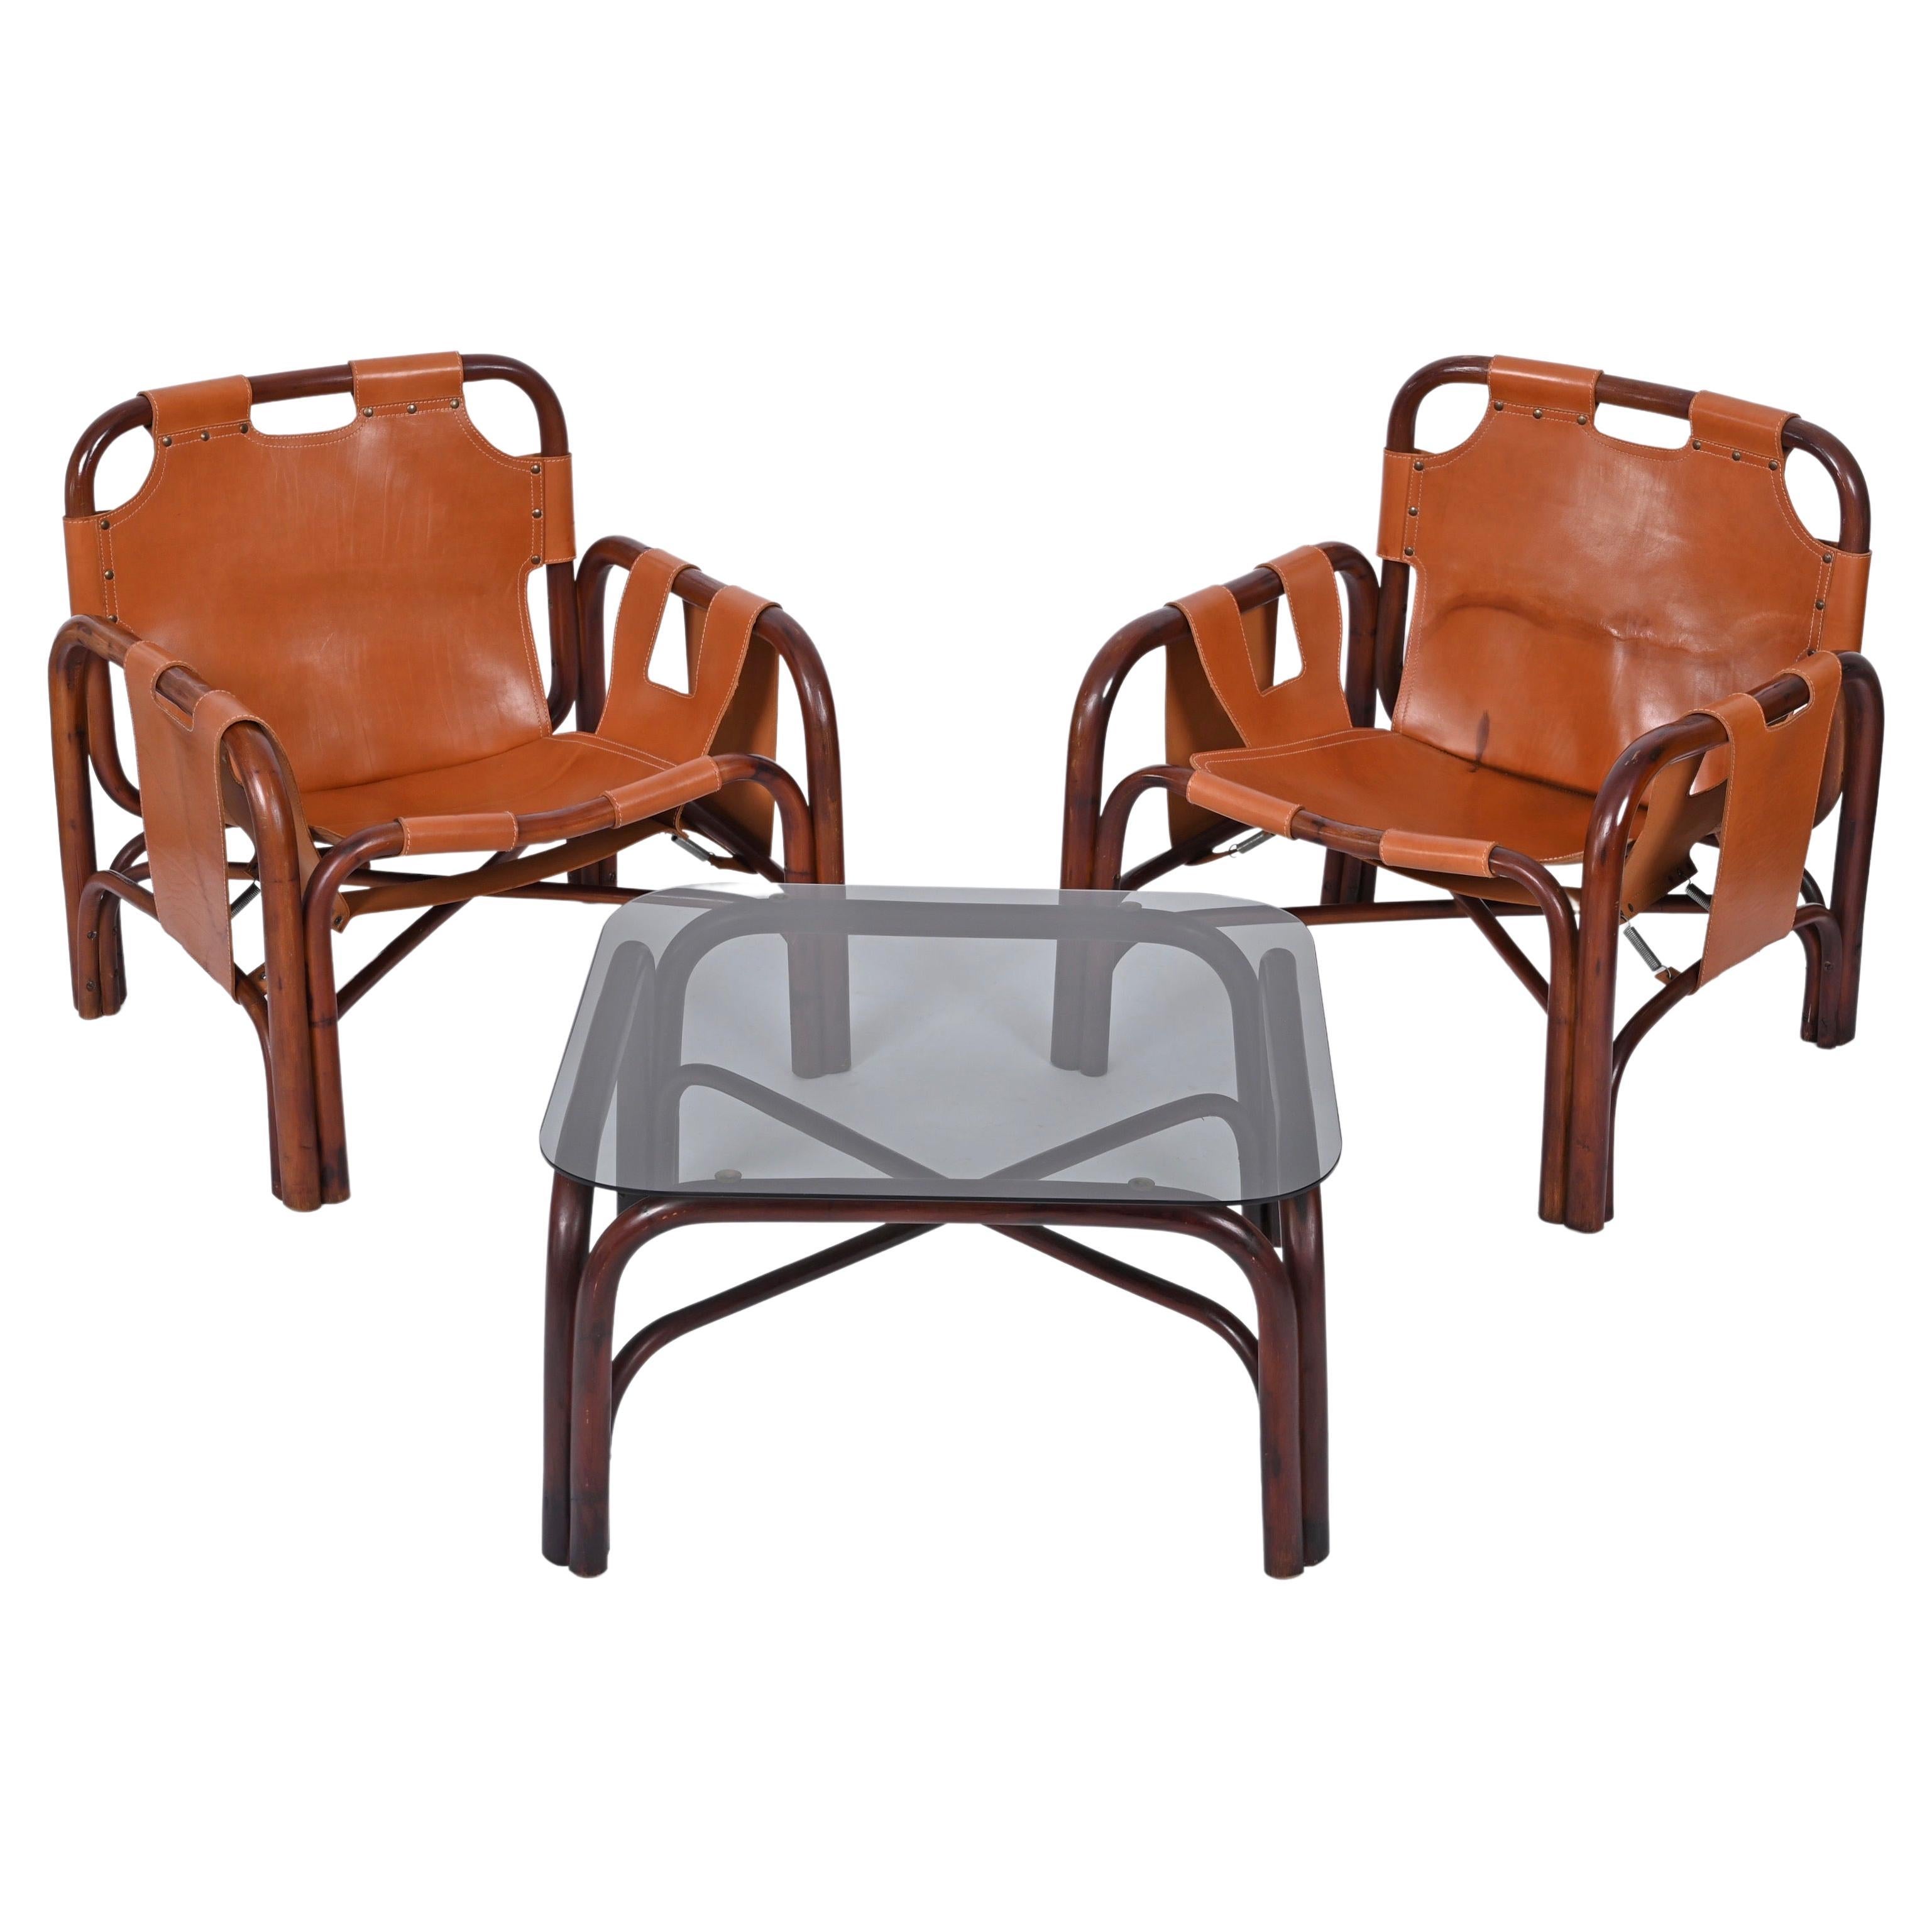 Set of Midcentury Pair of Bamboo and Leather Italian Armchairs and Table, 1960s For Sale